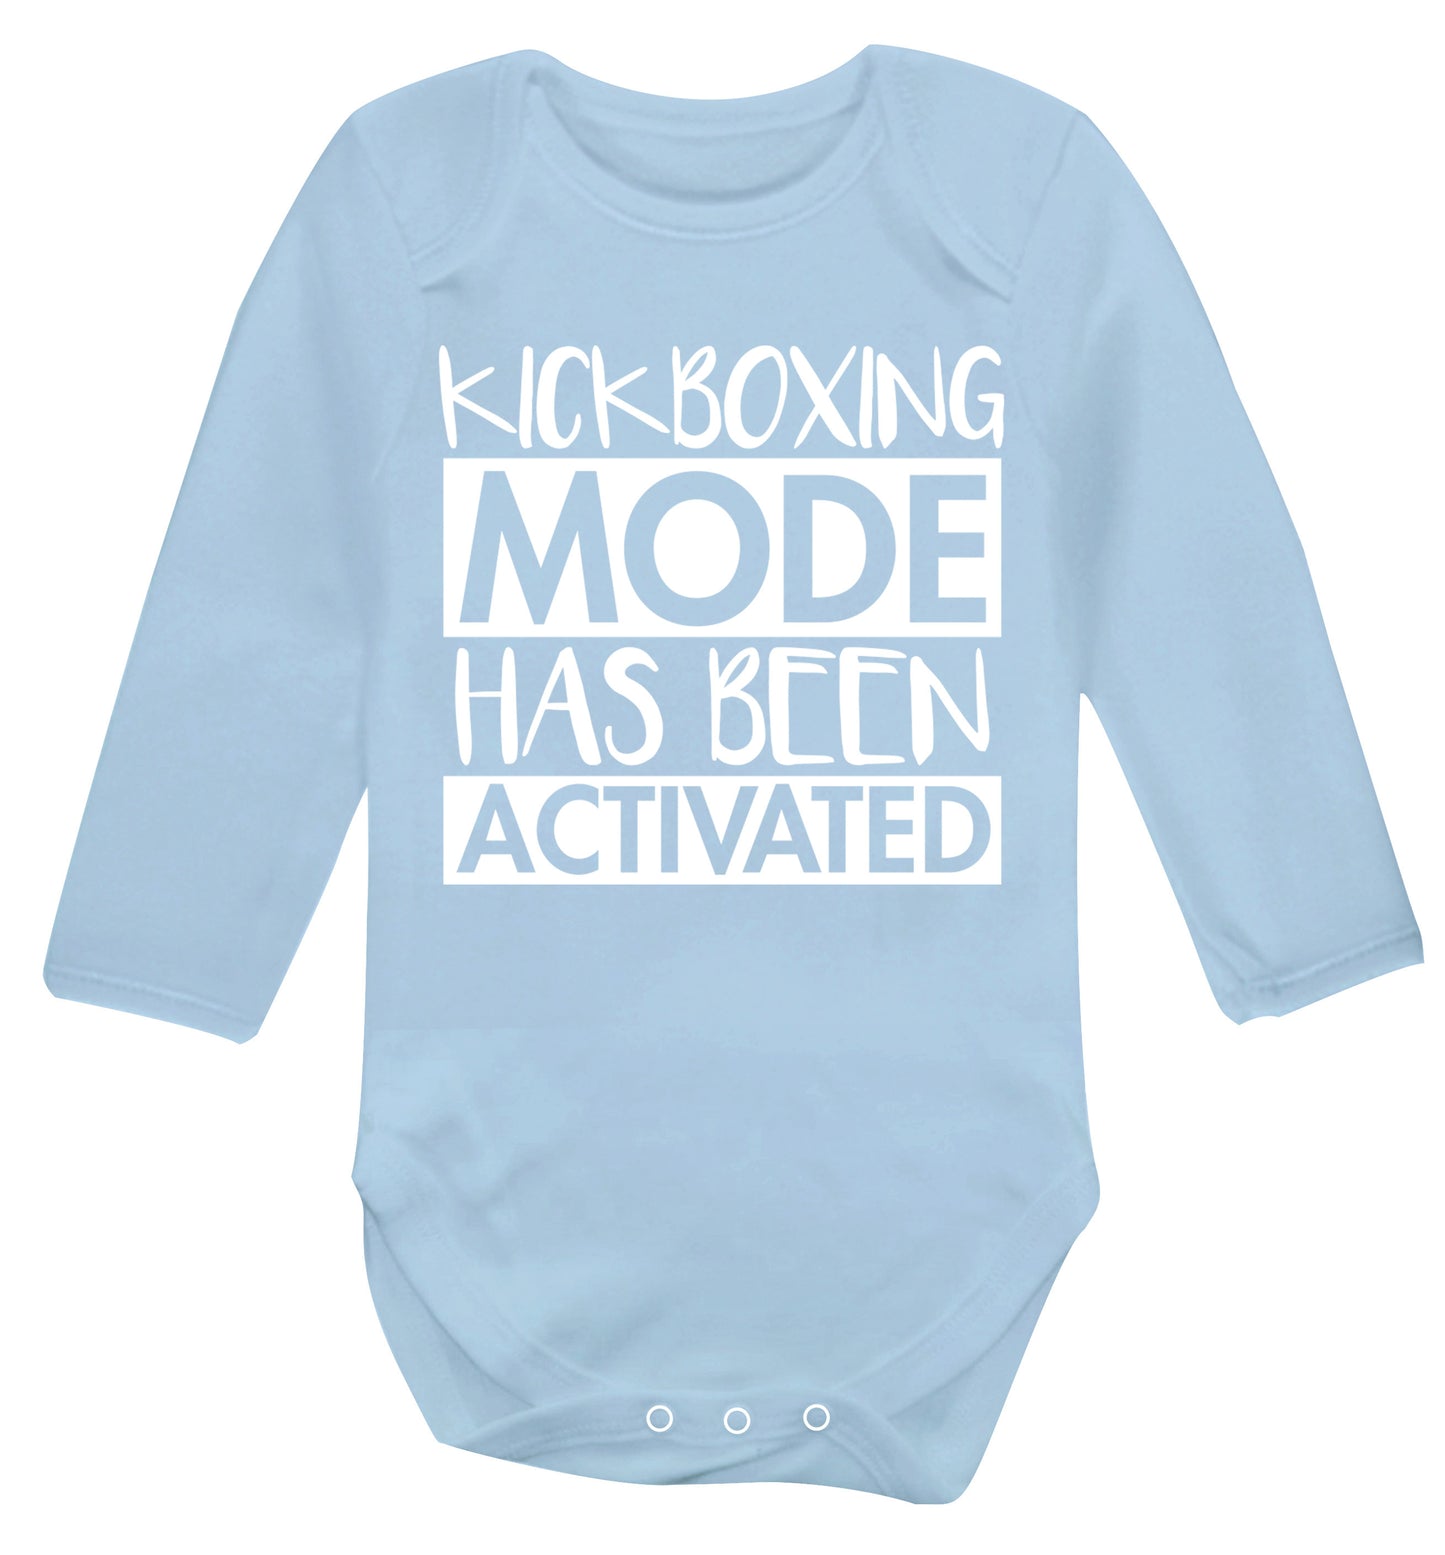 Kickboxing mode activated Baby Vest long sleeved pale blue 6-12 months